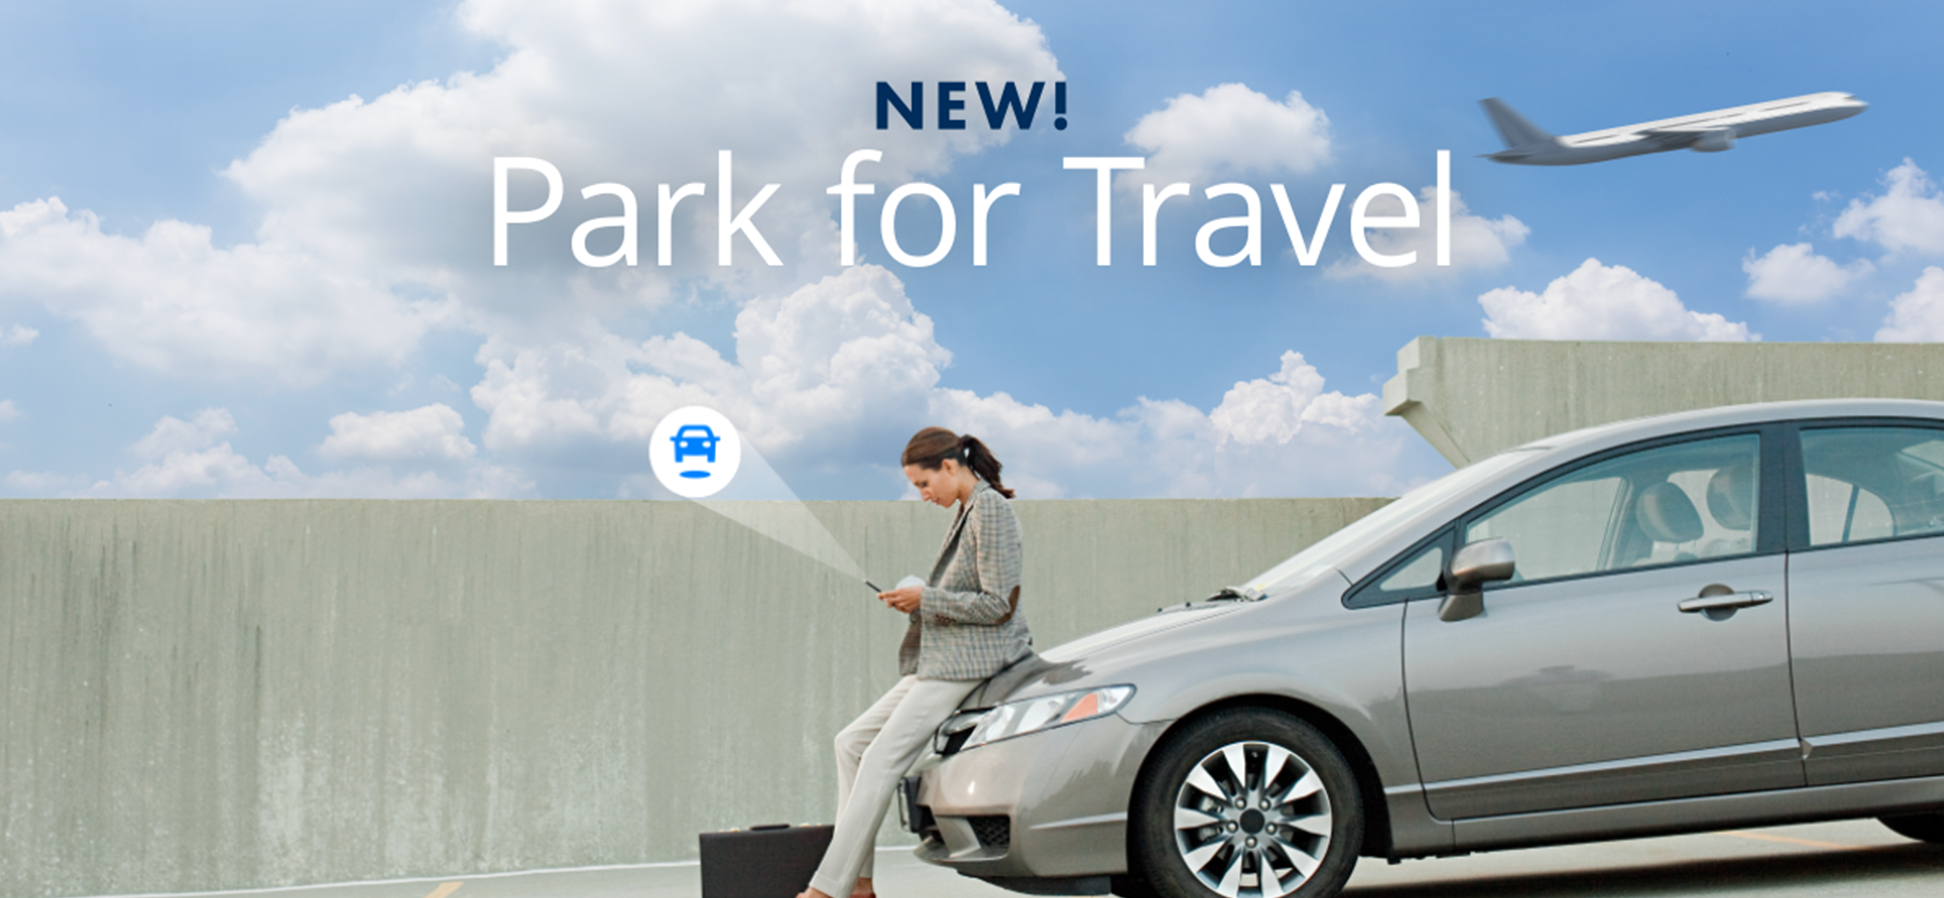 Introducing a Whole New Way to Park and Travel